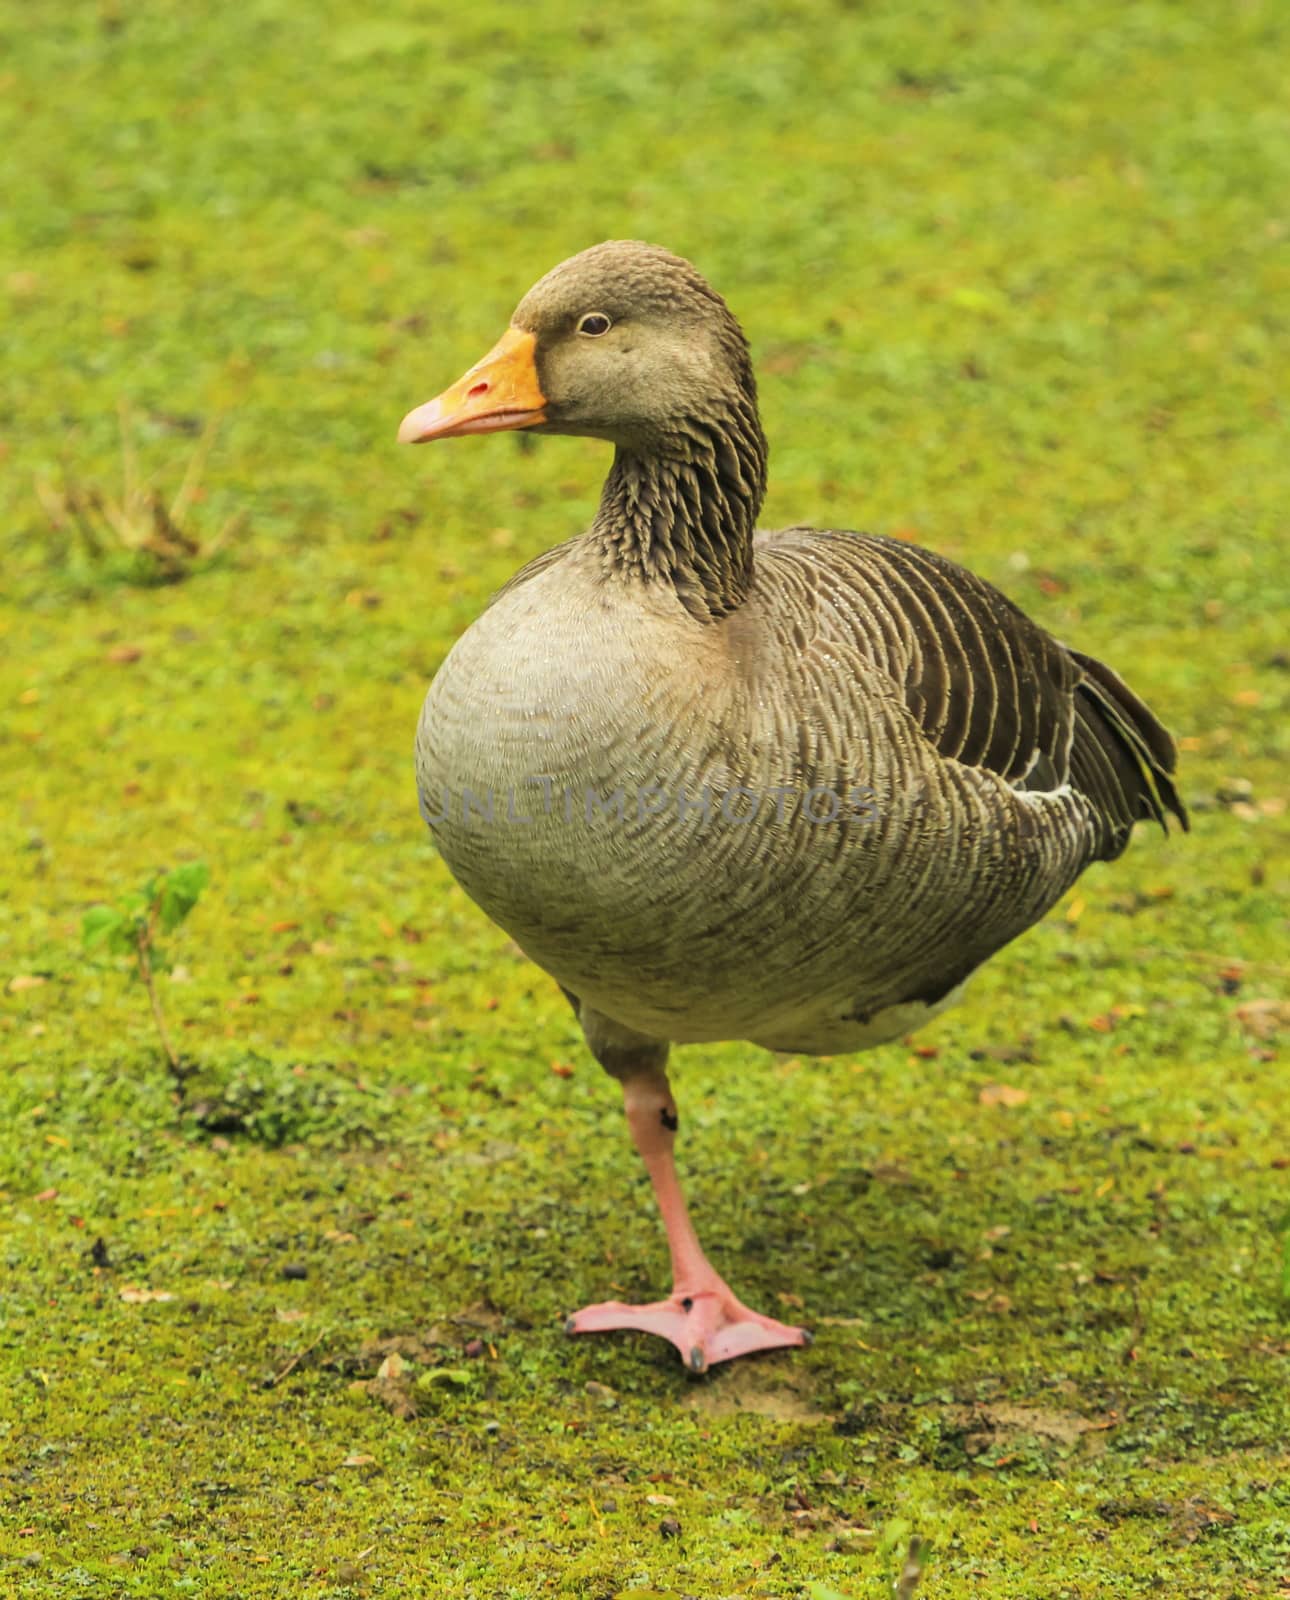 Greylag goose, anser, standing on one foot by Elenaphotos21